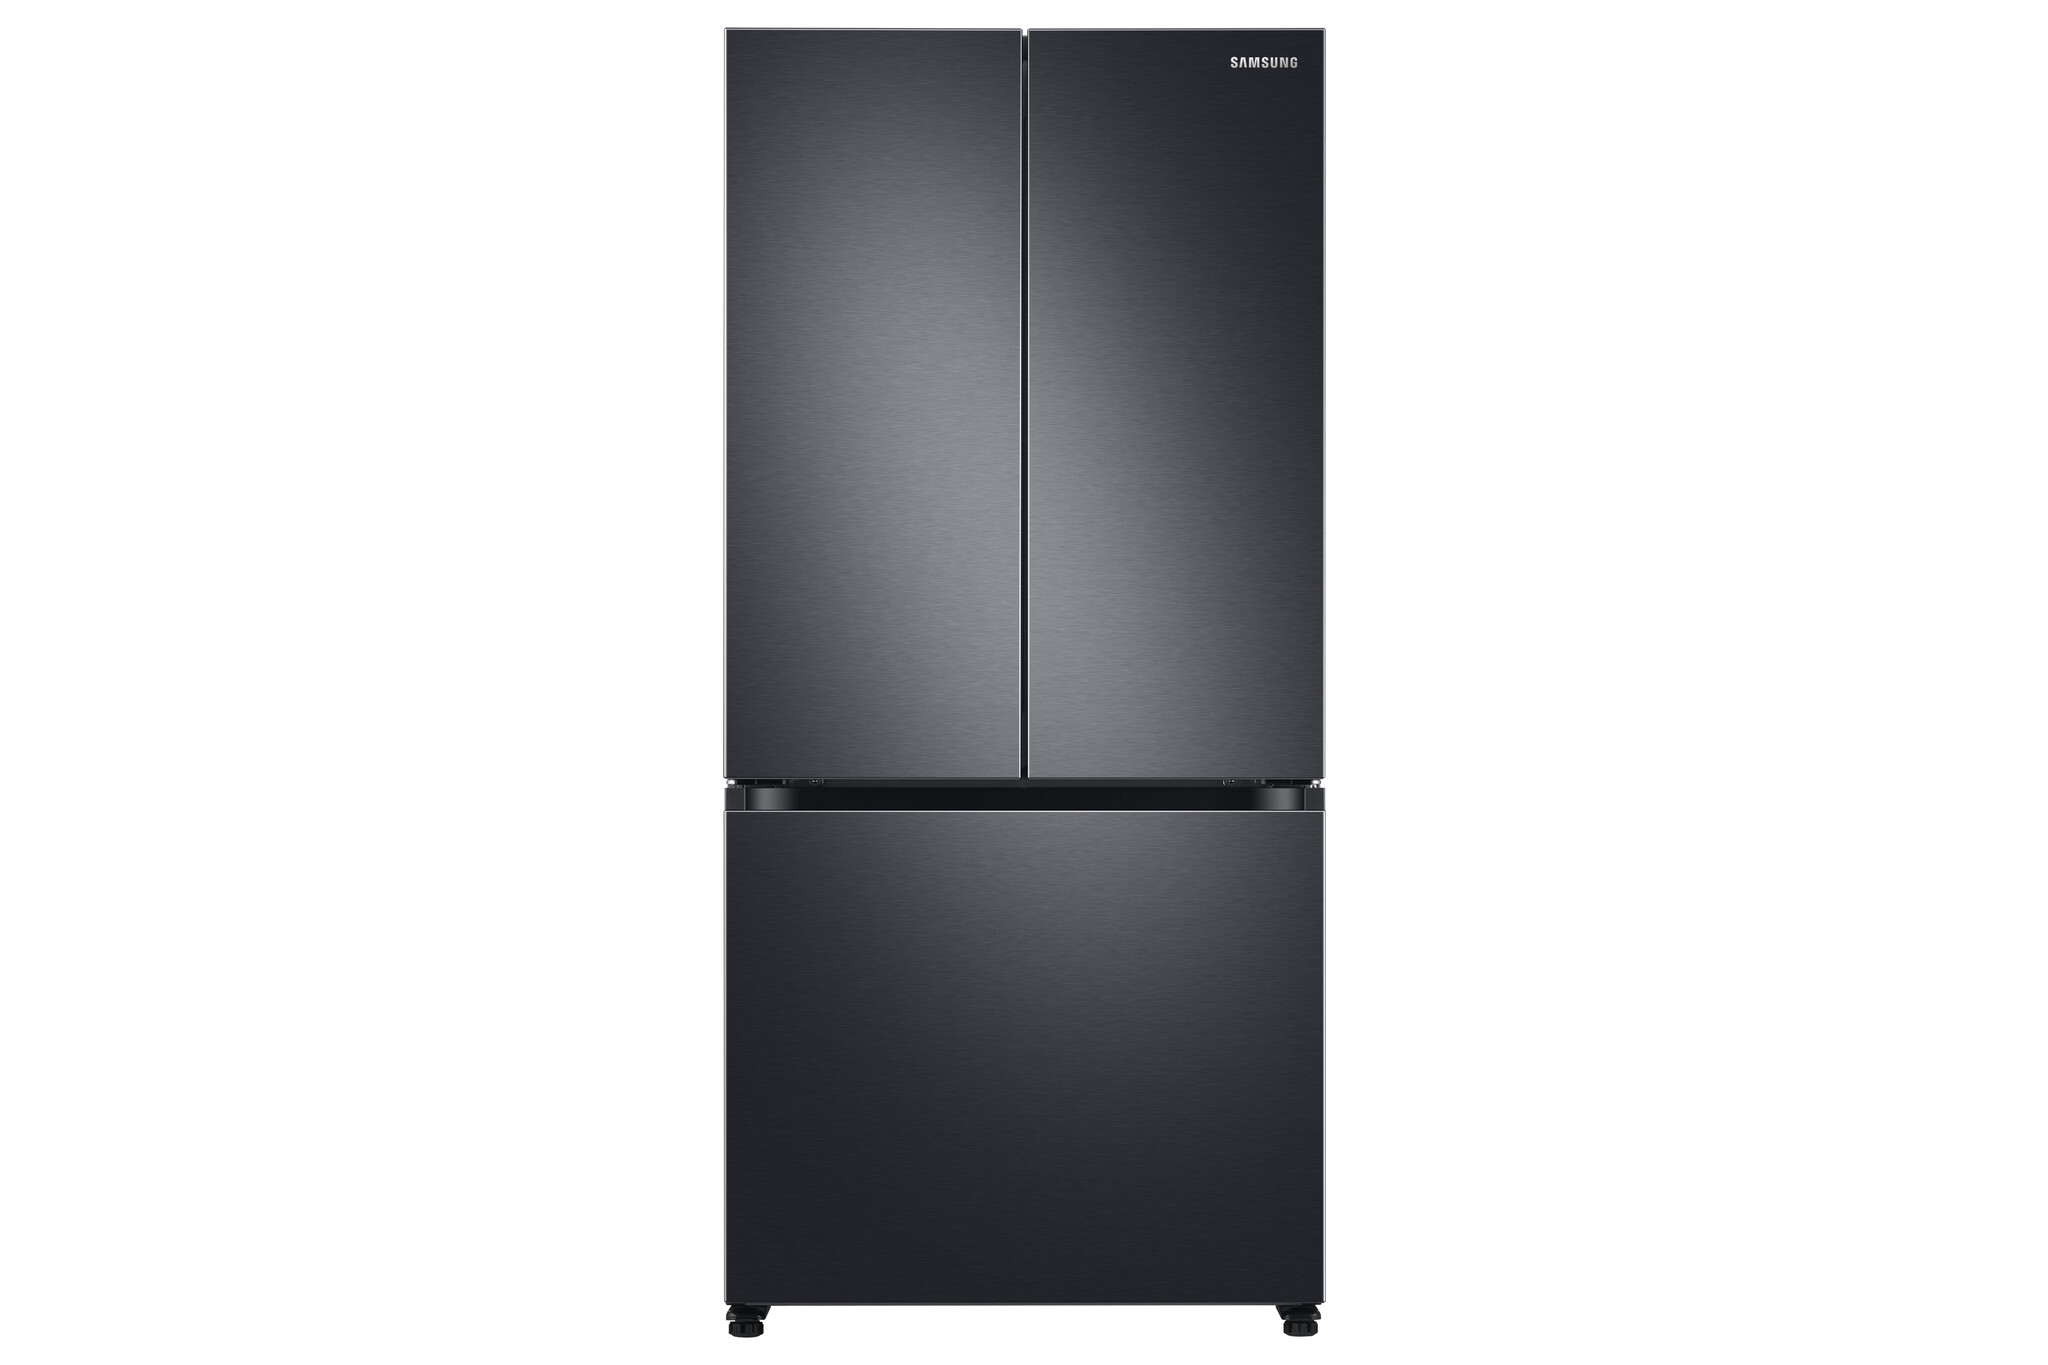 Samsung Series 7 RF50A5002B1 Plumbed Total No Frost American Fridge Freezer – Black / Stainless Steel – F Rated #349252